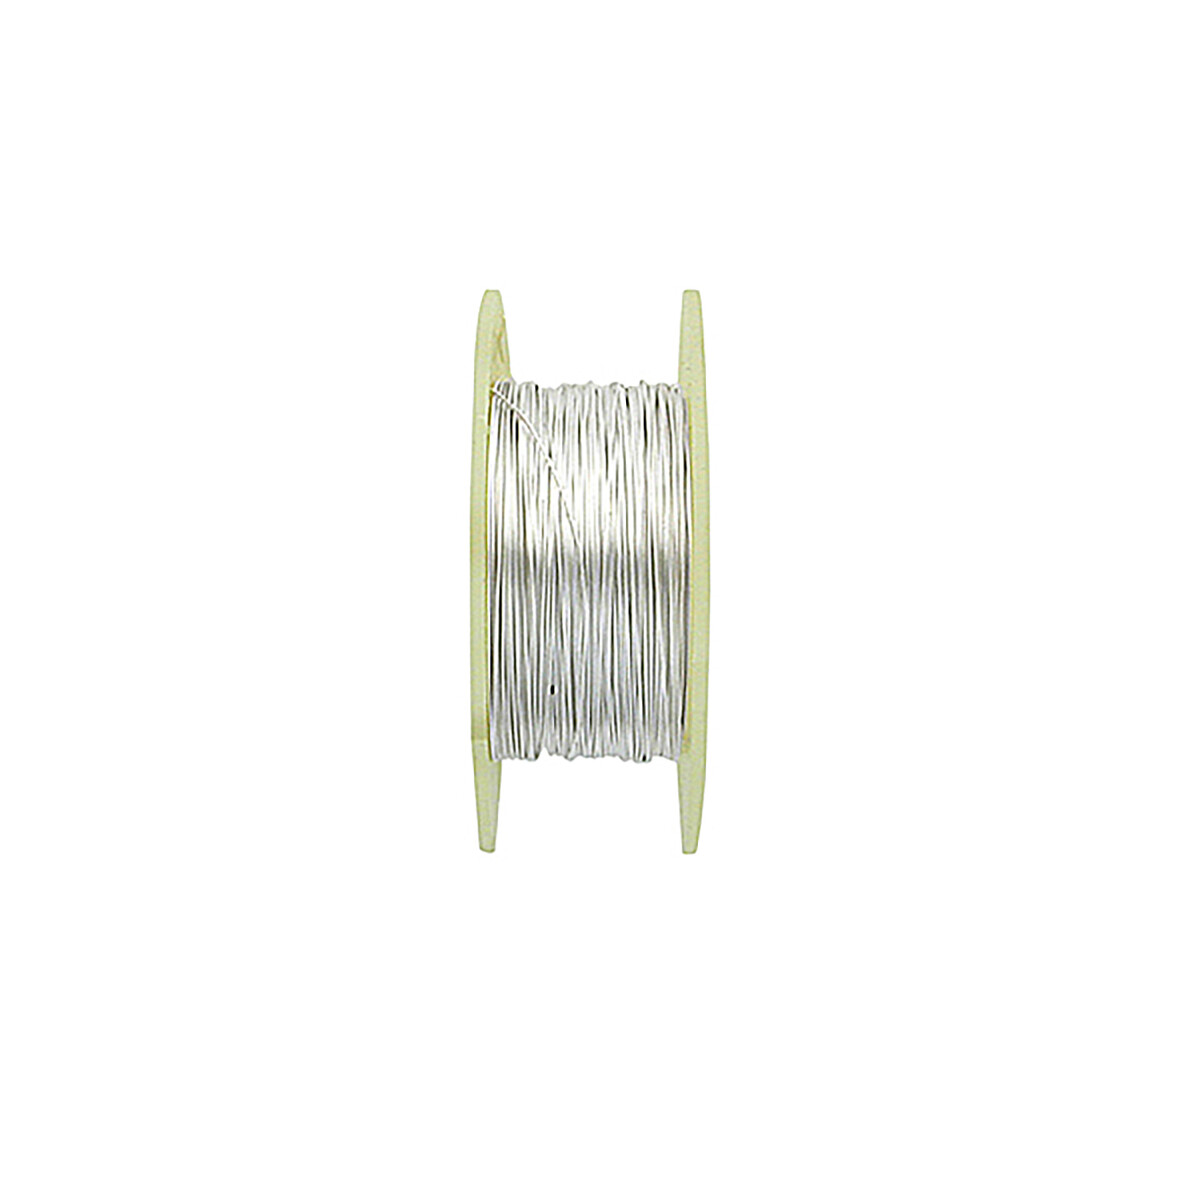 Sterling Silver Dead Soft Round Wire Spools - Santa Fe Jewelers Supply :  Santa Fe Jewelers Supply